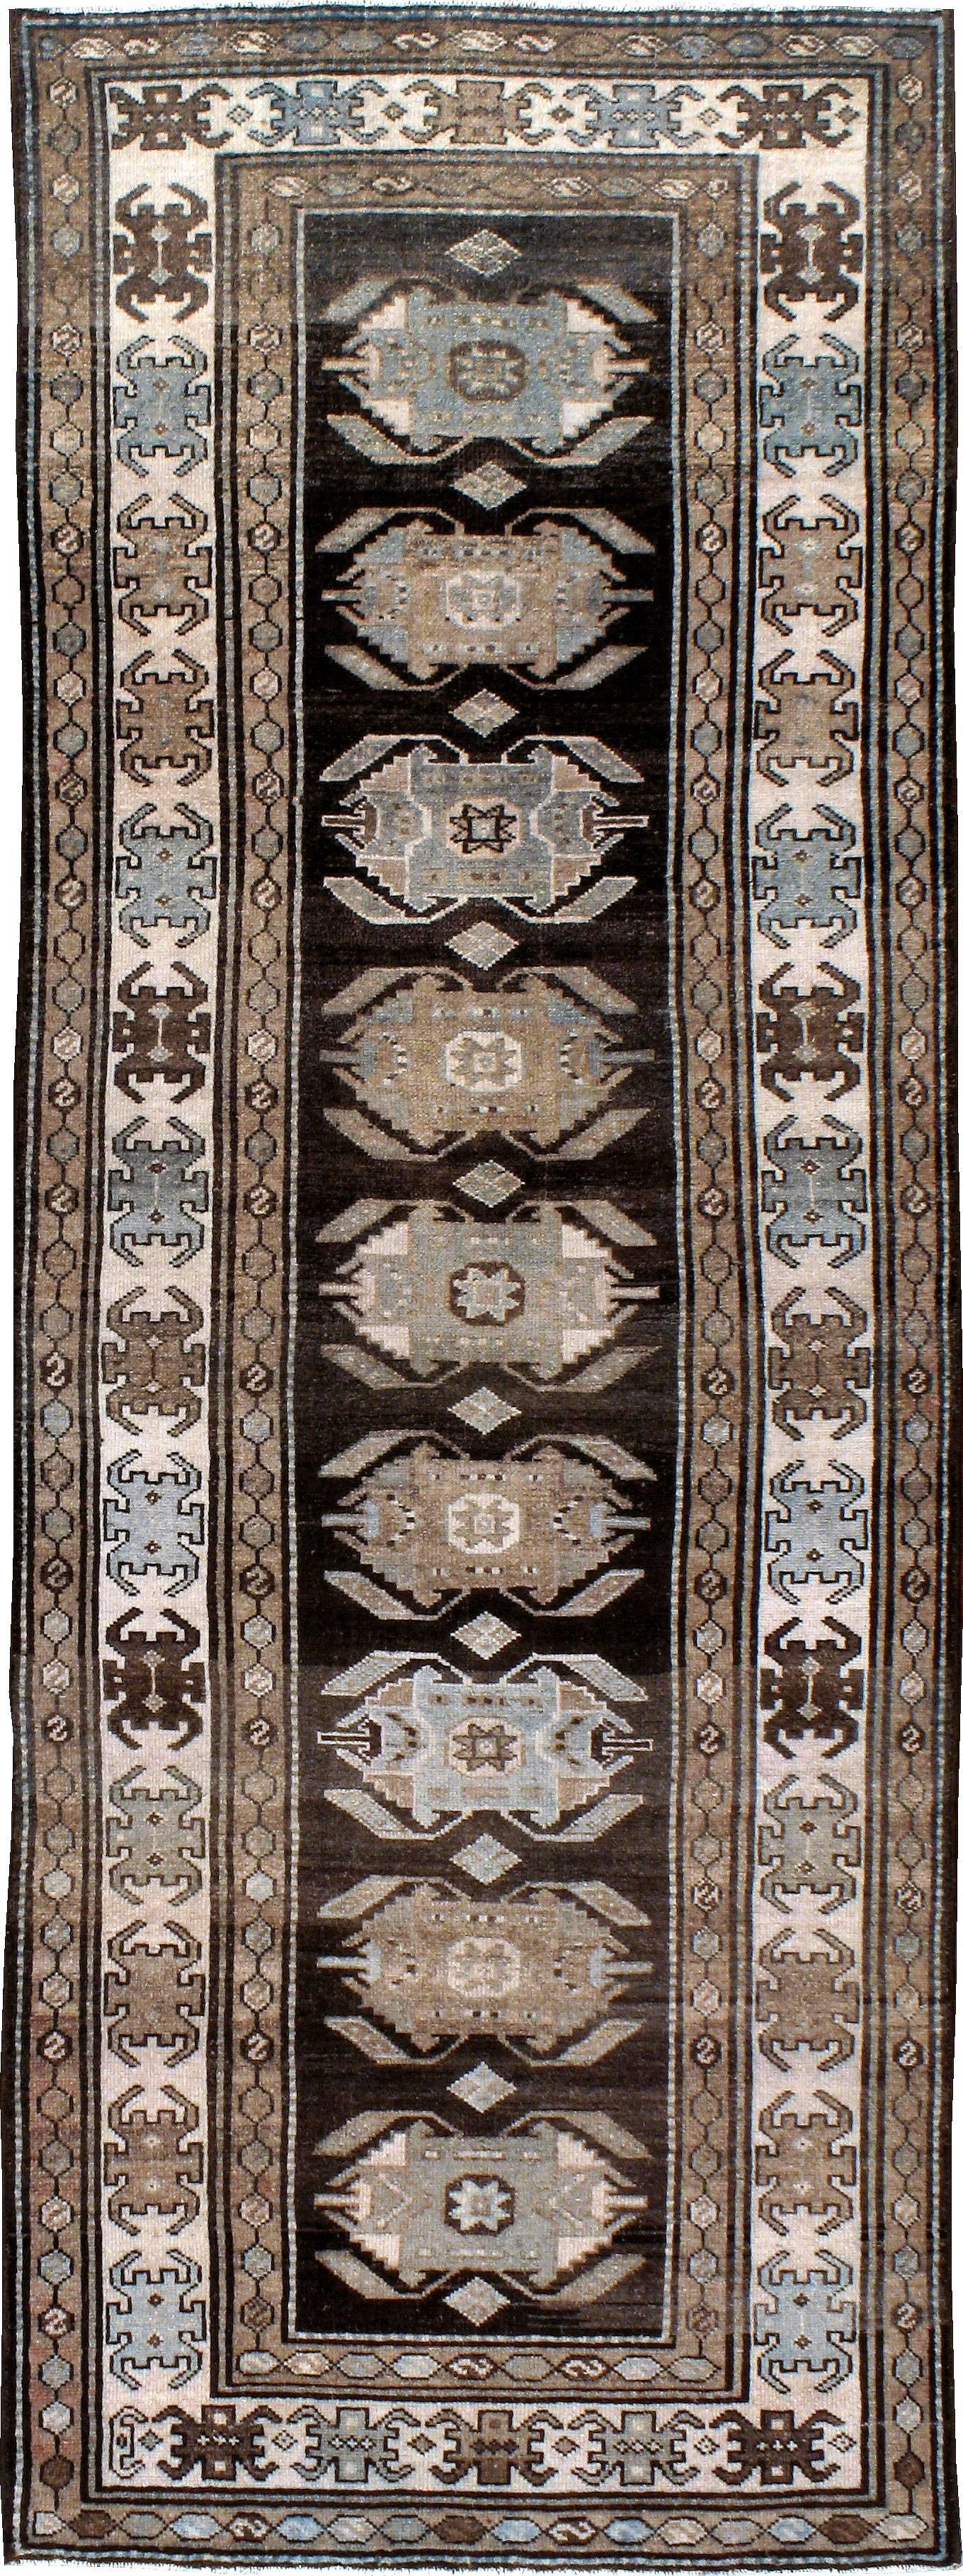 An antique Persian Kurd rug from the first quarter of the 20th century.